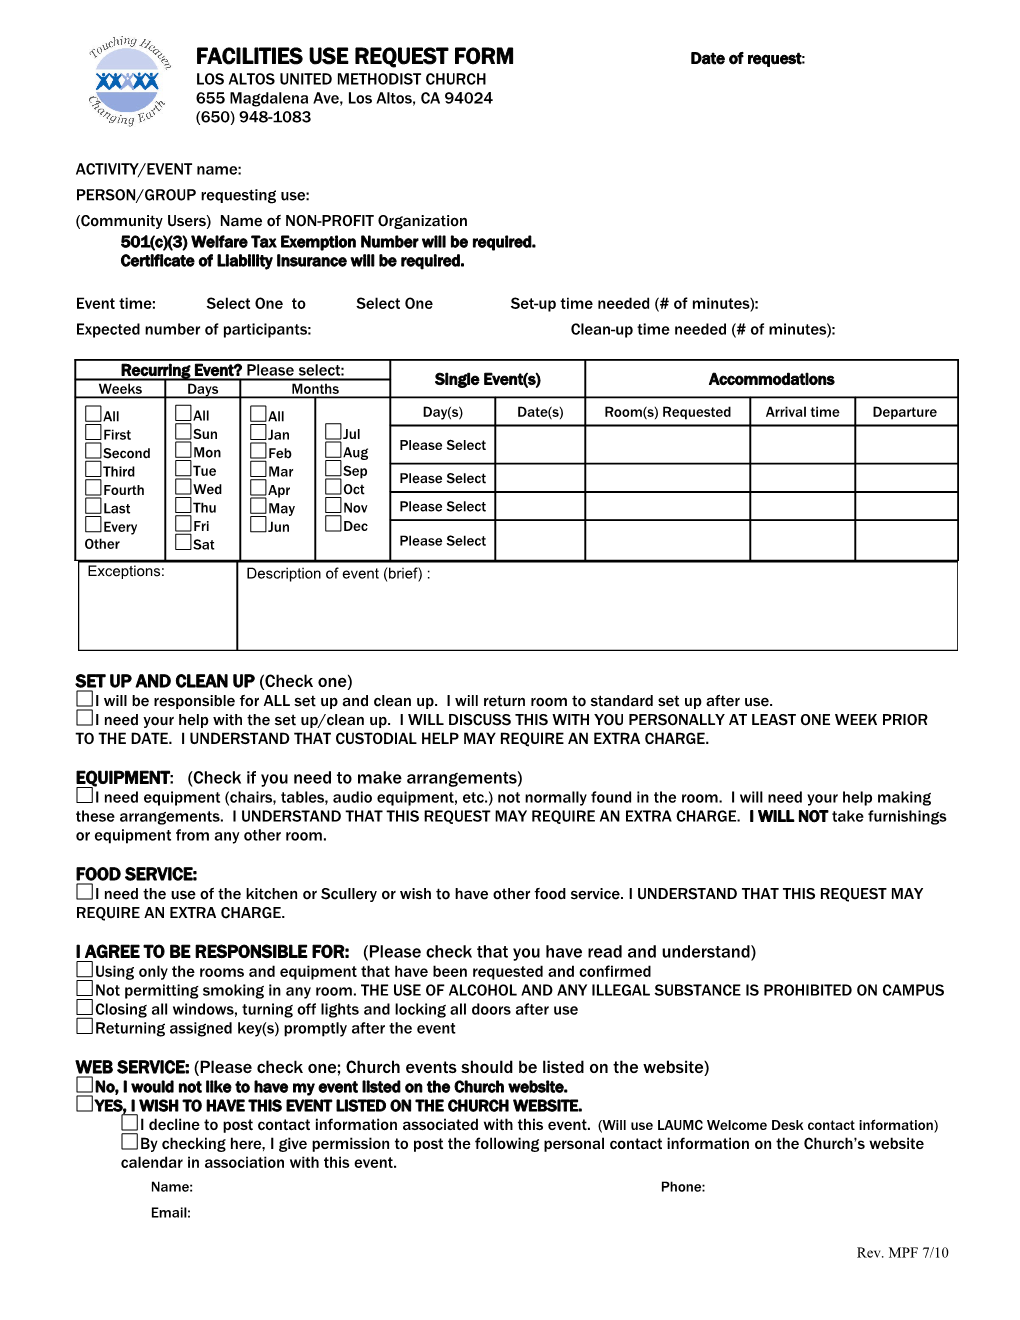 Facilities Use Request Form